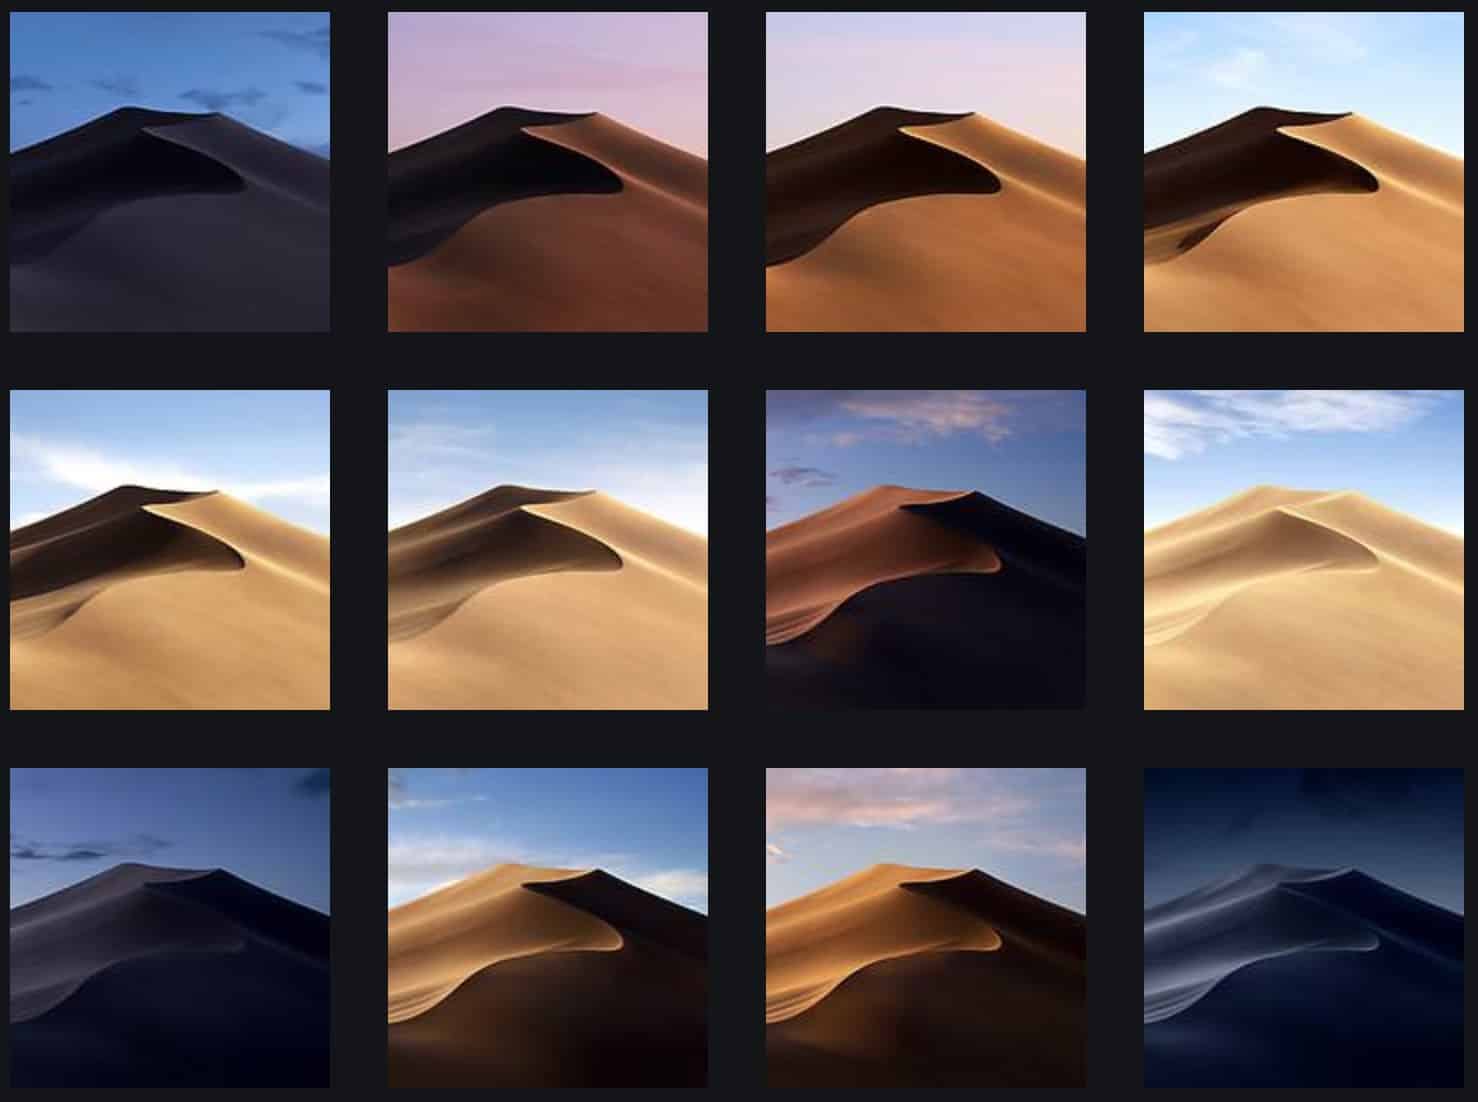 download macos mojave from catalina